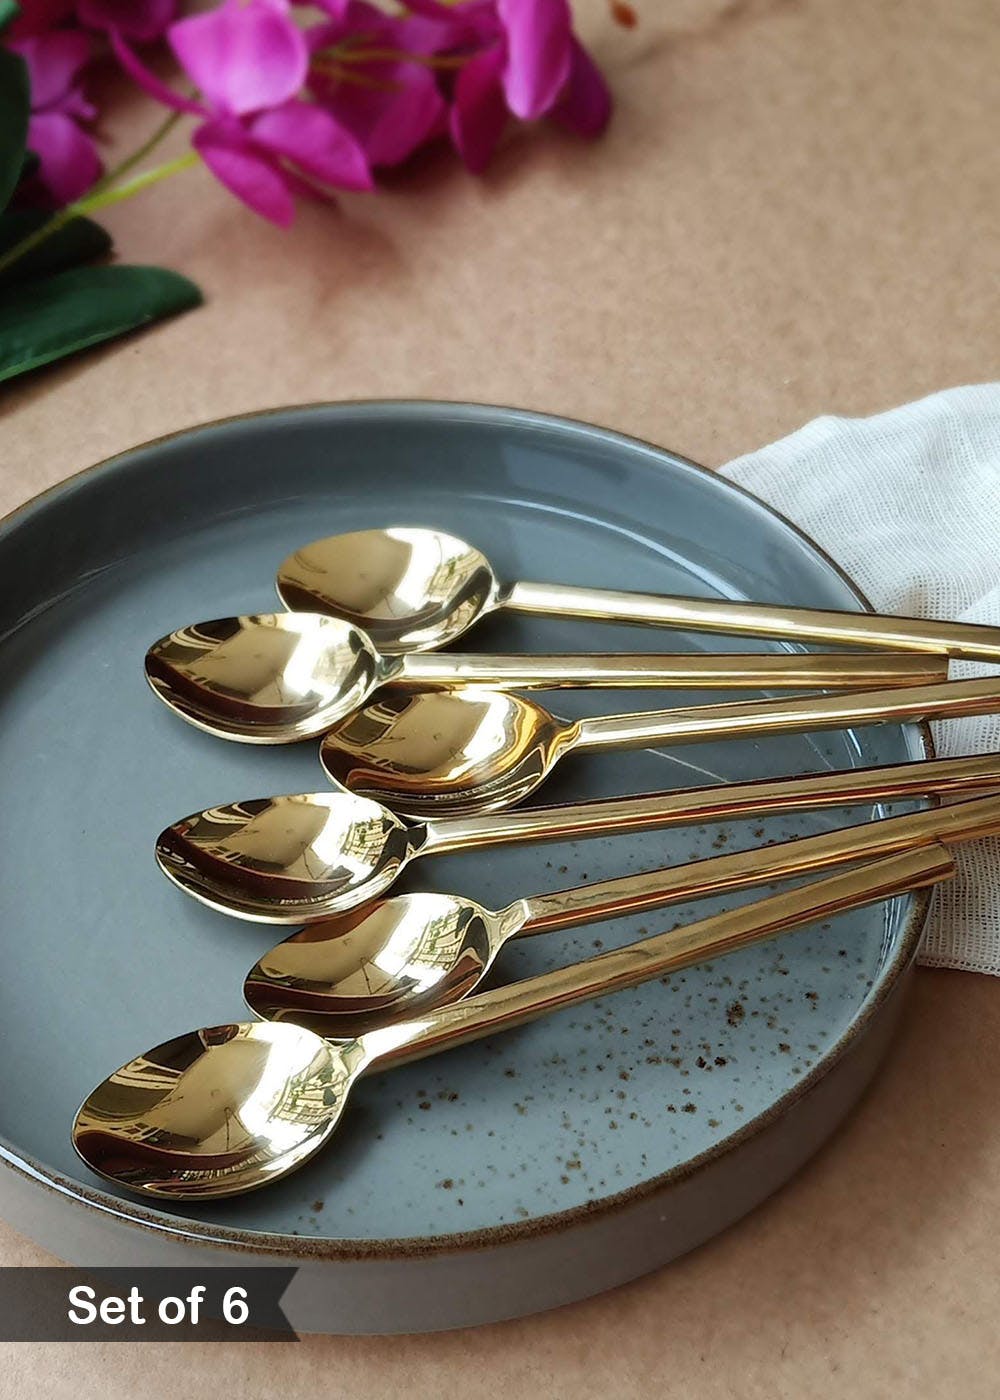 Get Stainless Steel PVD Gold Finish Dining Spoon- Set of 6 at ₹ 1750 ...